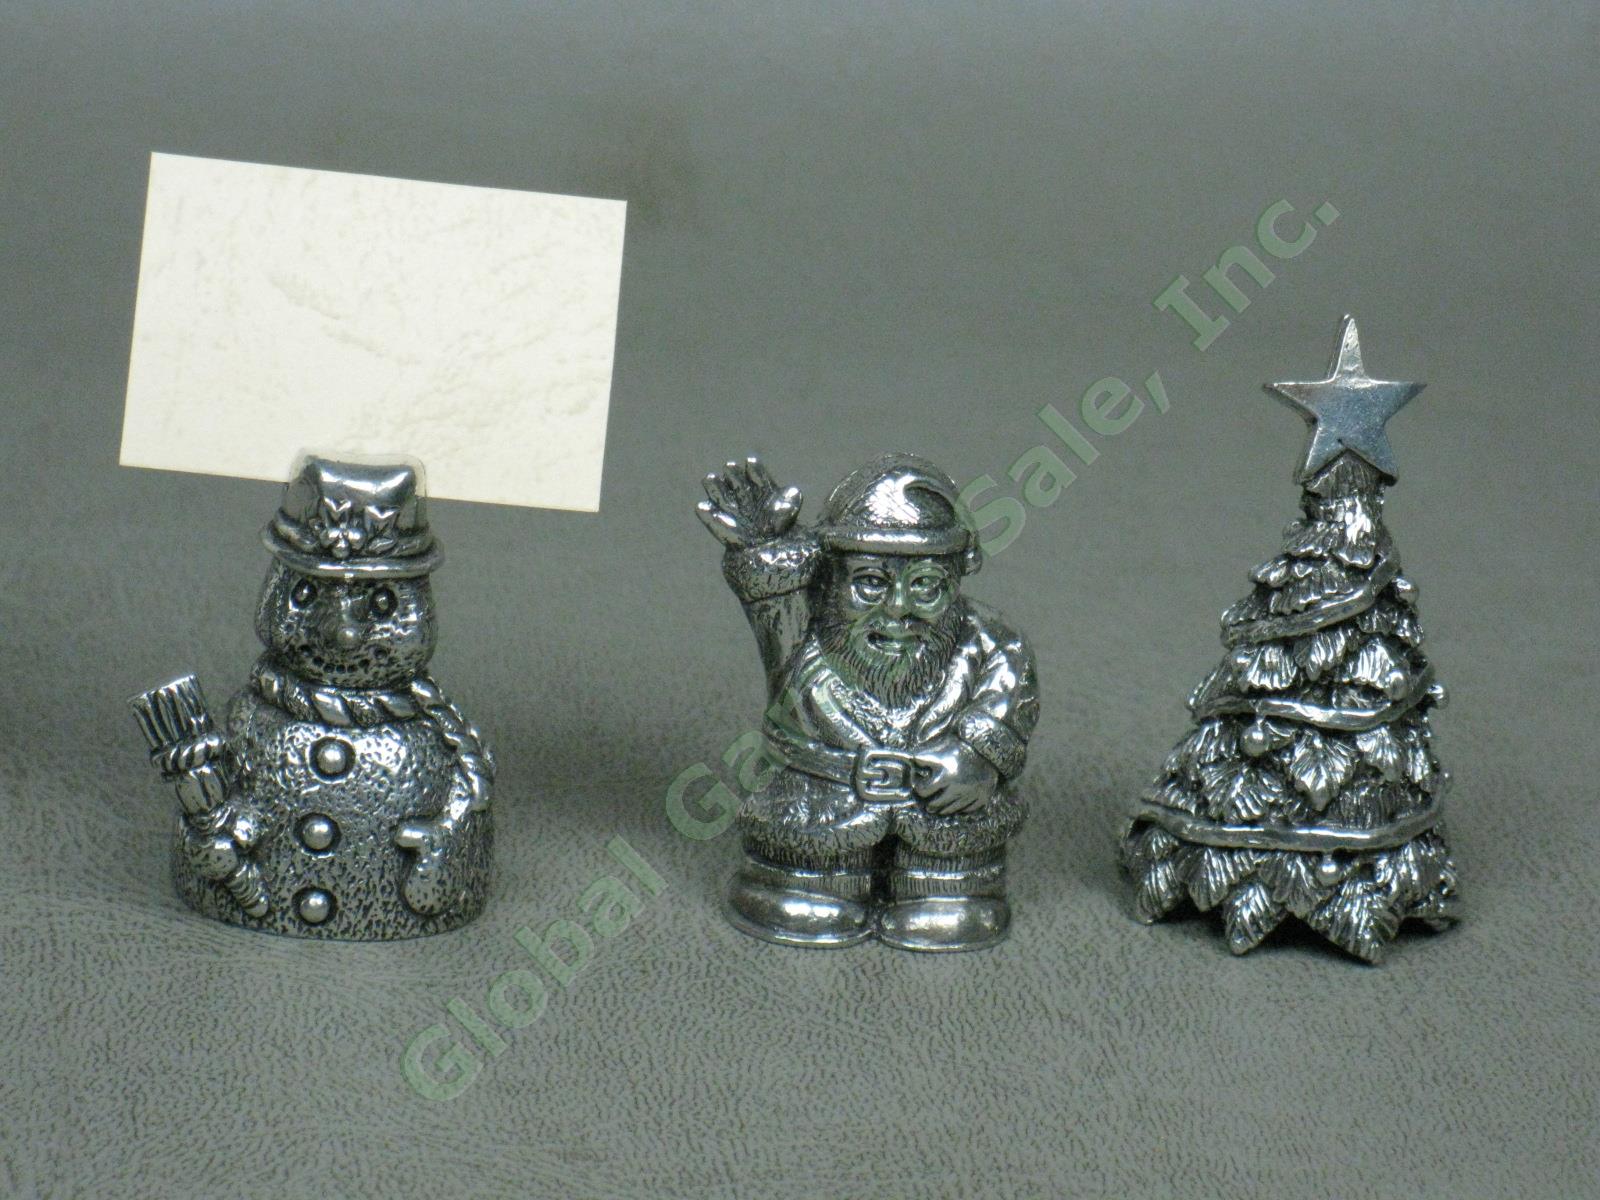 143 NEW Pewter Placecard Name Card Holder Lot Cherub Butterfly Shell Pineapple + 1